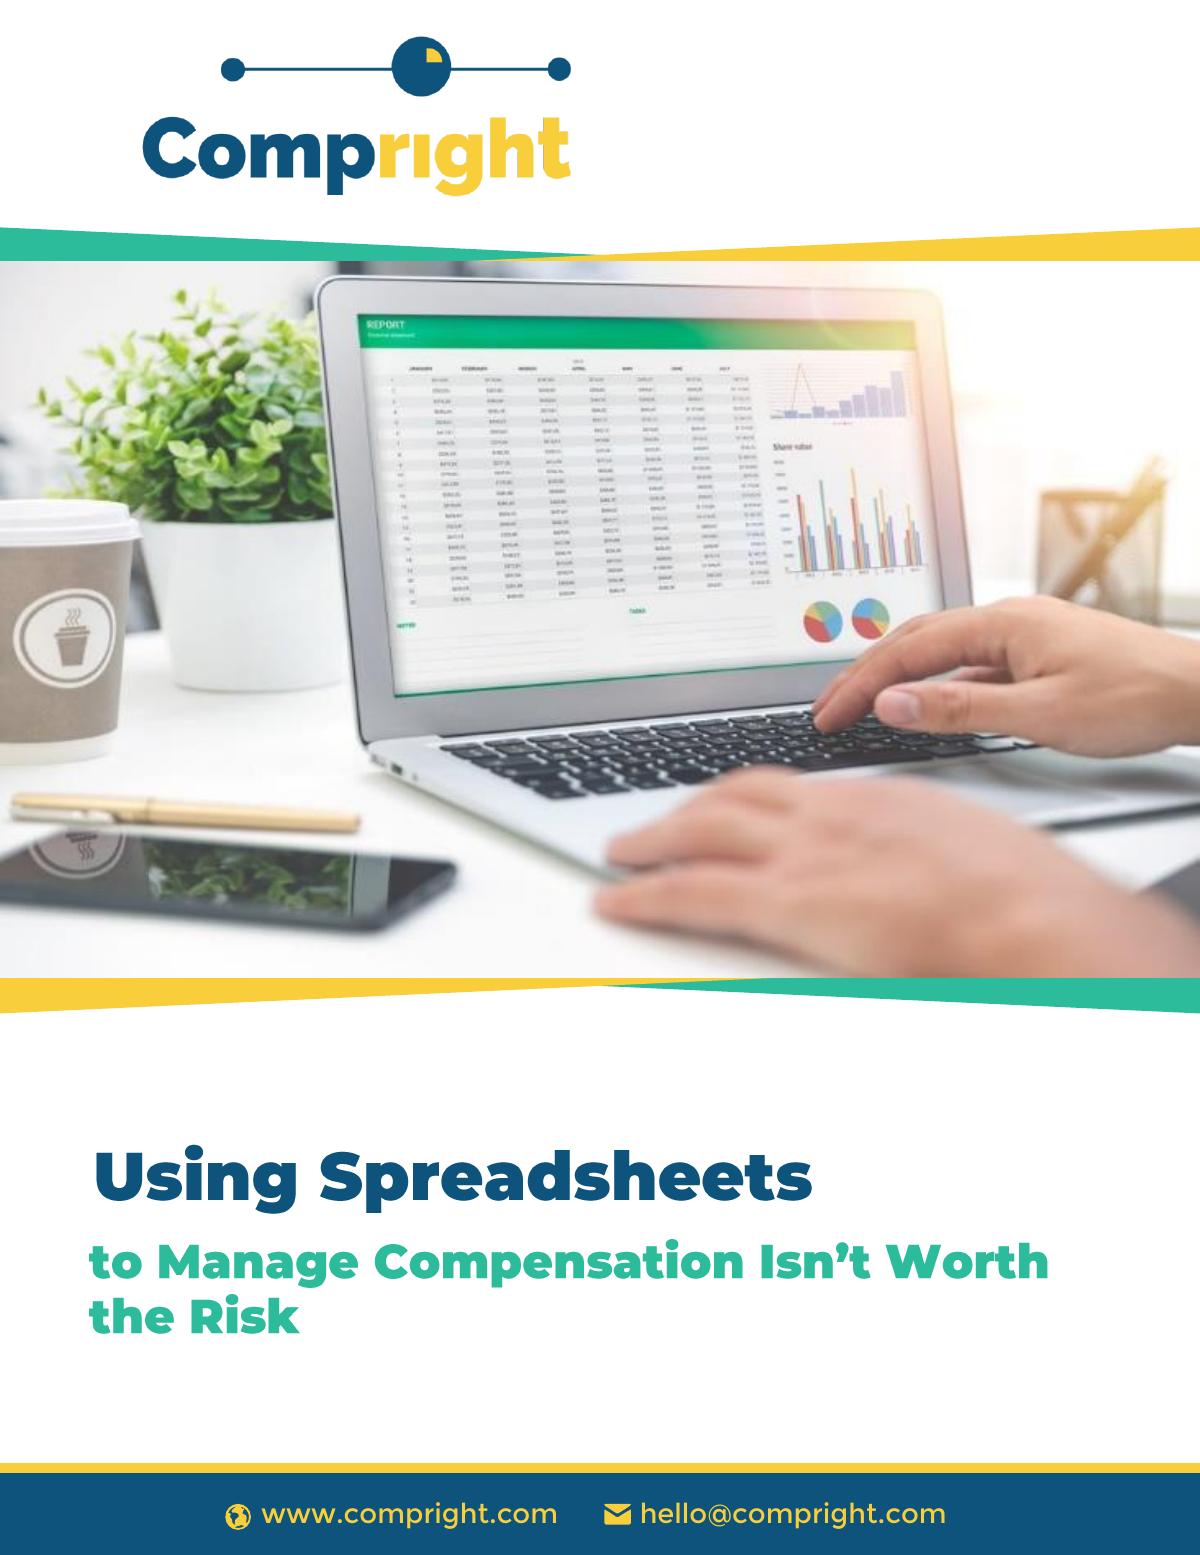 Using Spreadsheets to Manage Compensation Isn't Worth the Risk